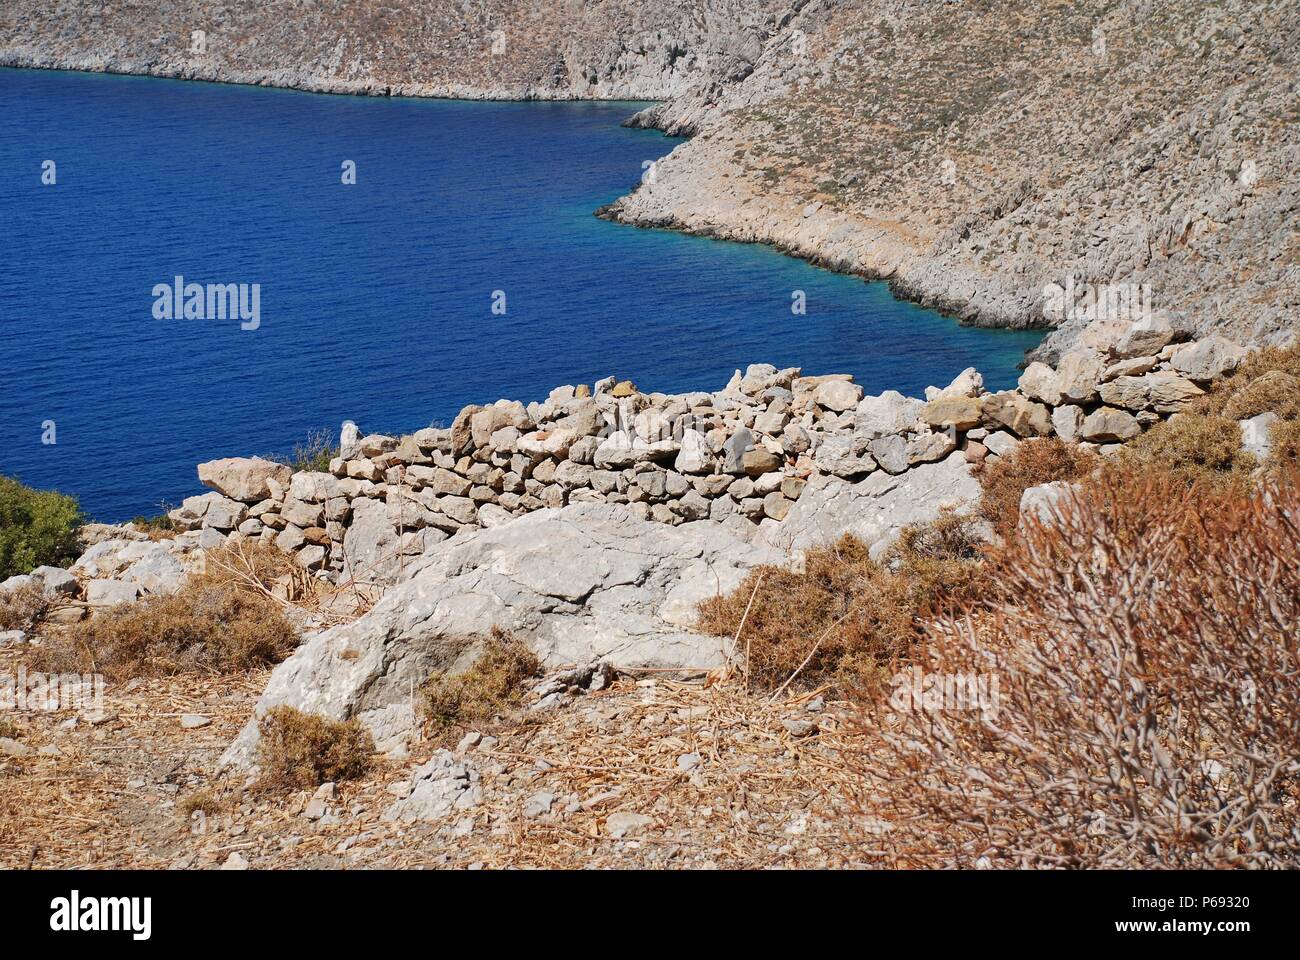 The remains of the abandoned village of Gera on the Greek island of Tilos. Stock Photo